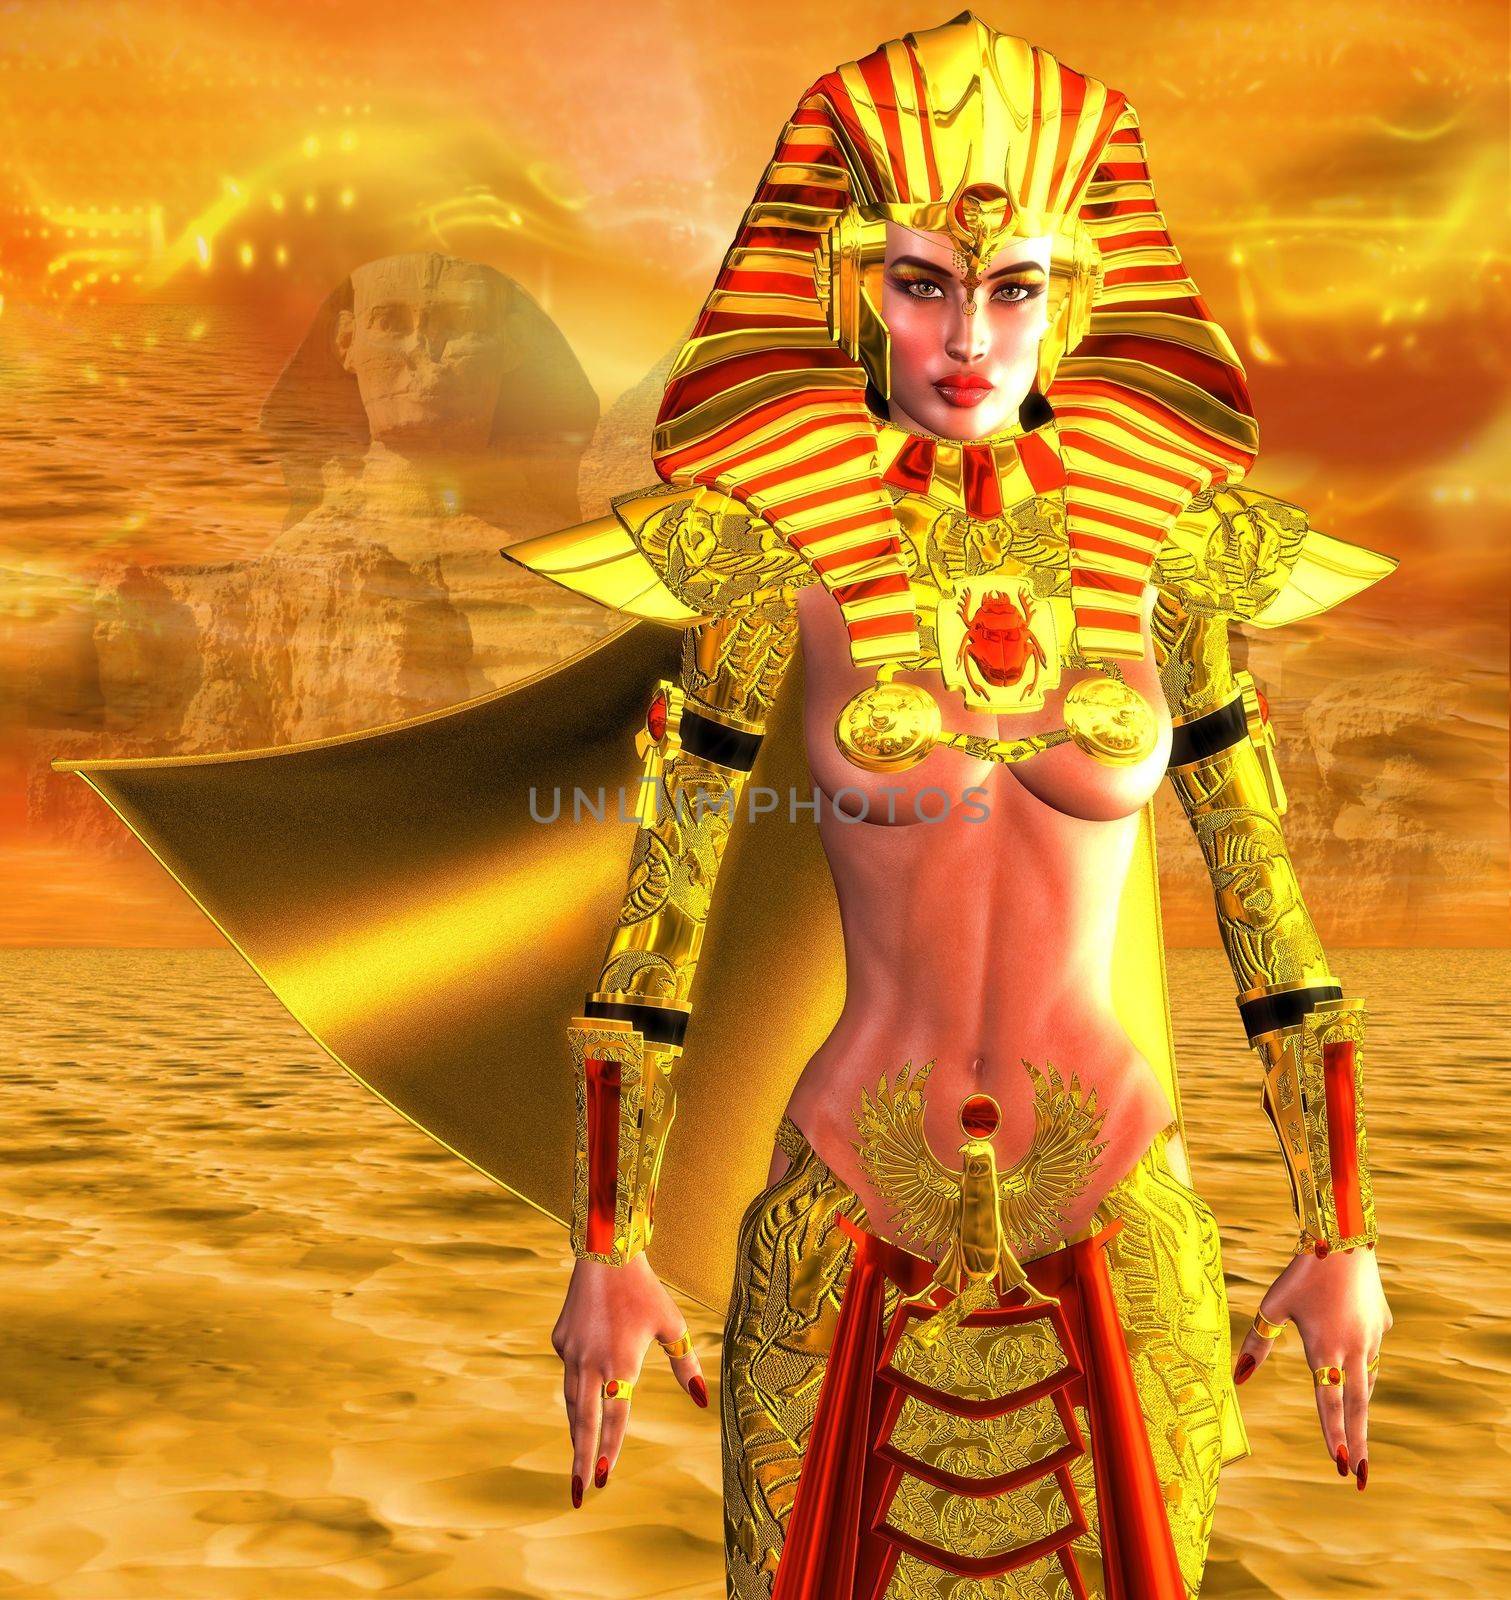 Warrior Queen, Egyptian Style. by TK0920